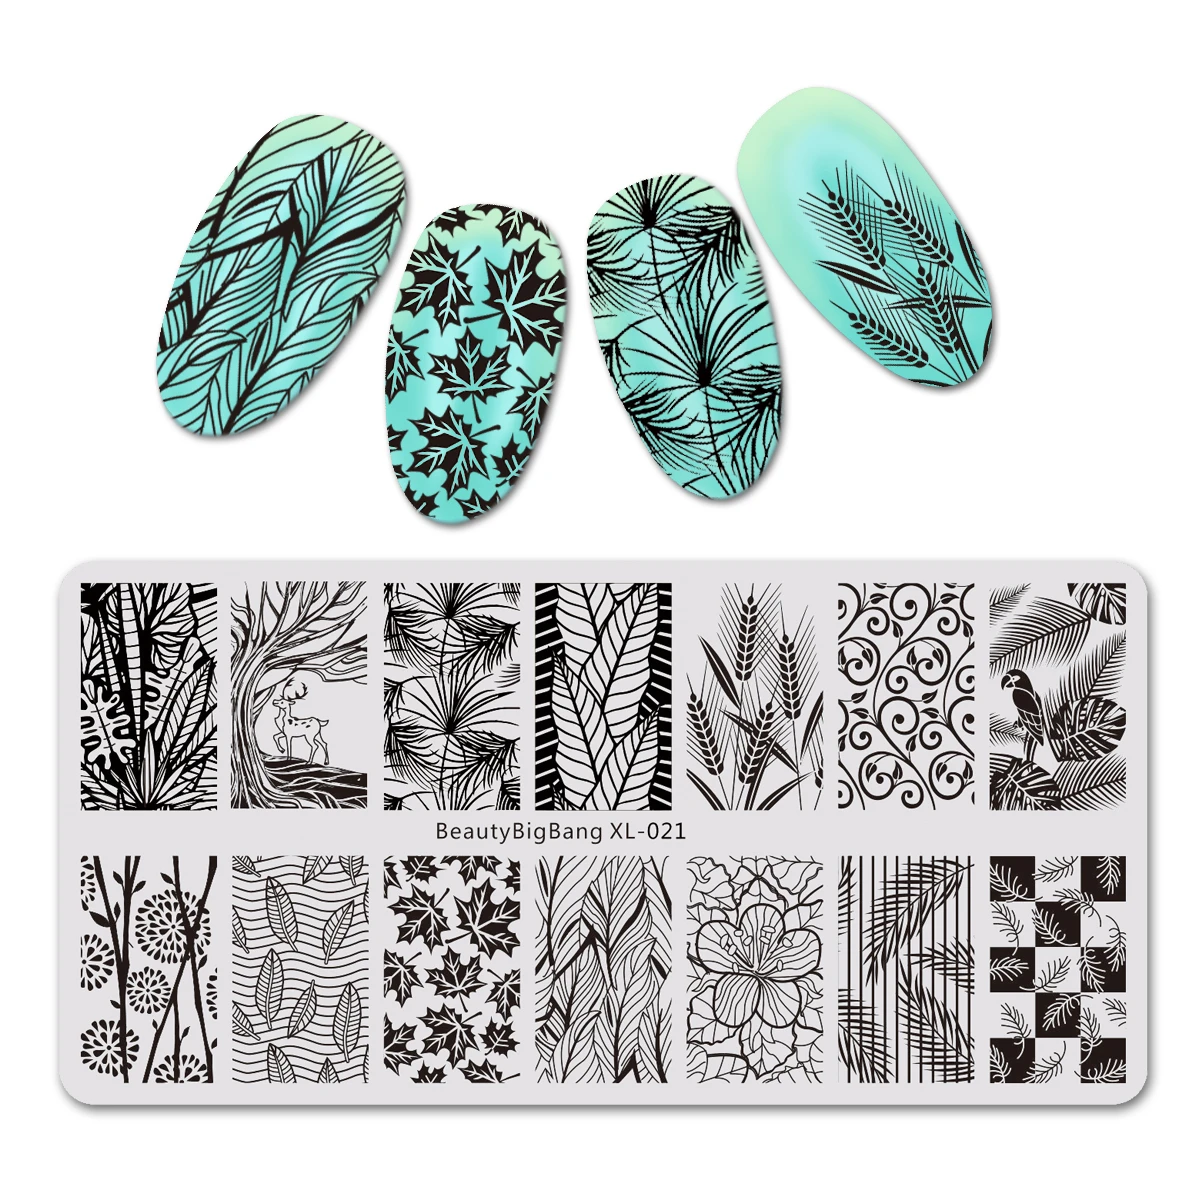 

BeautyBigBang XL-021 6*12cm Rectangle Nail Stamping Plates Autumn Leaf Pattern Nail Art Stamp Template Image Plate Stencils